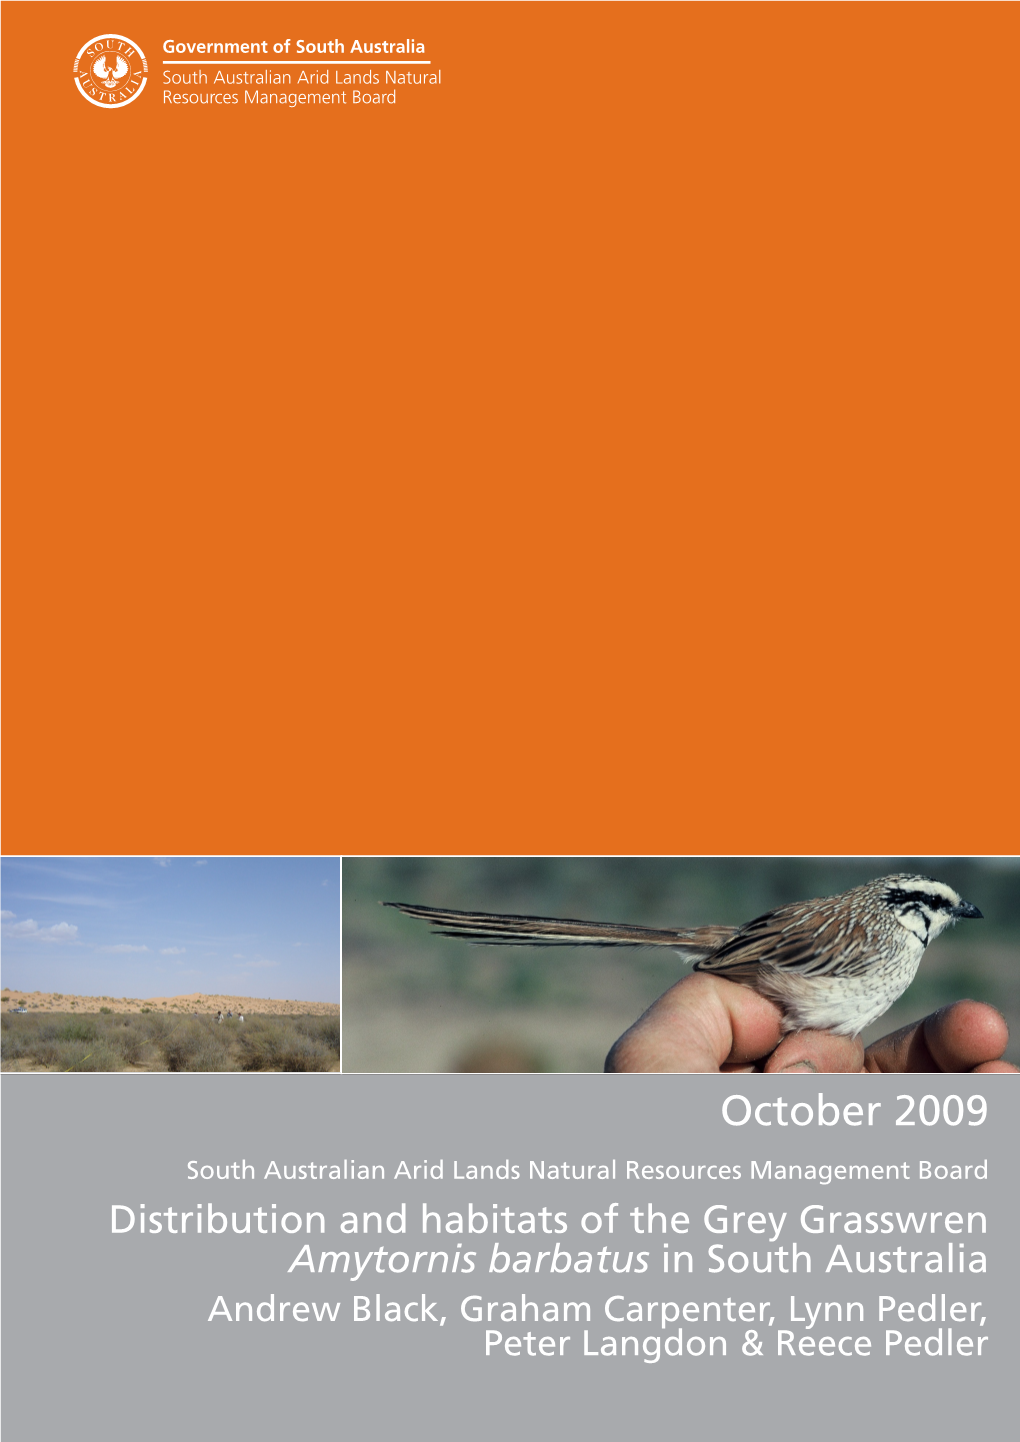 Distribution and Habitats of the Grey Grasswren in South Australia